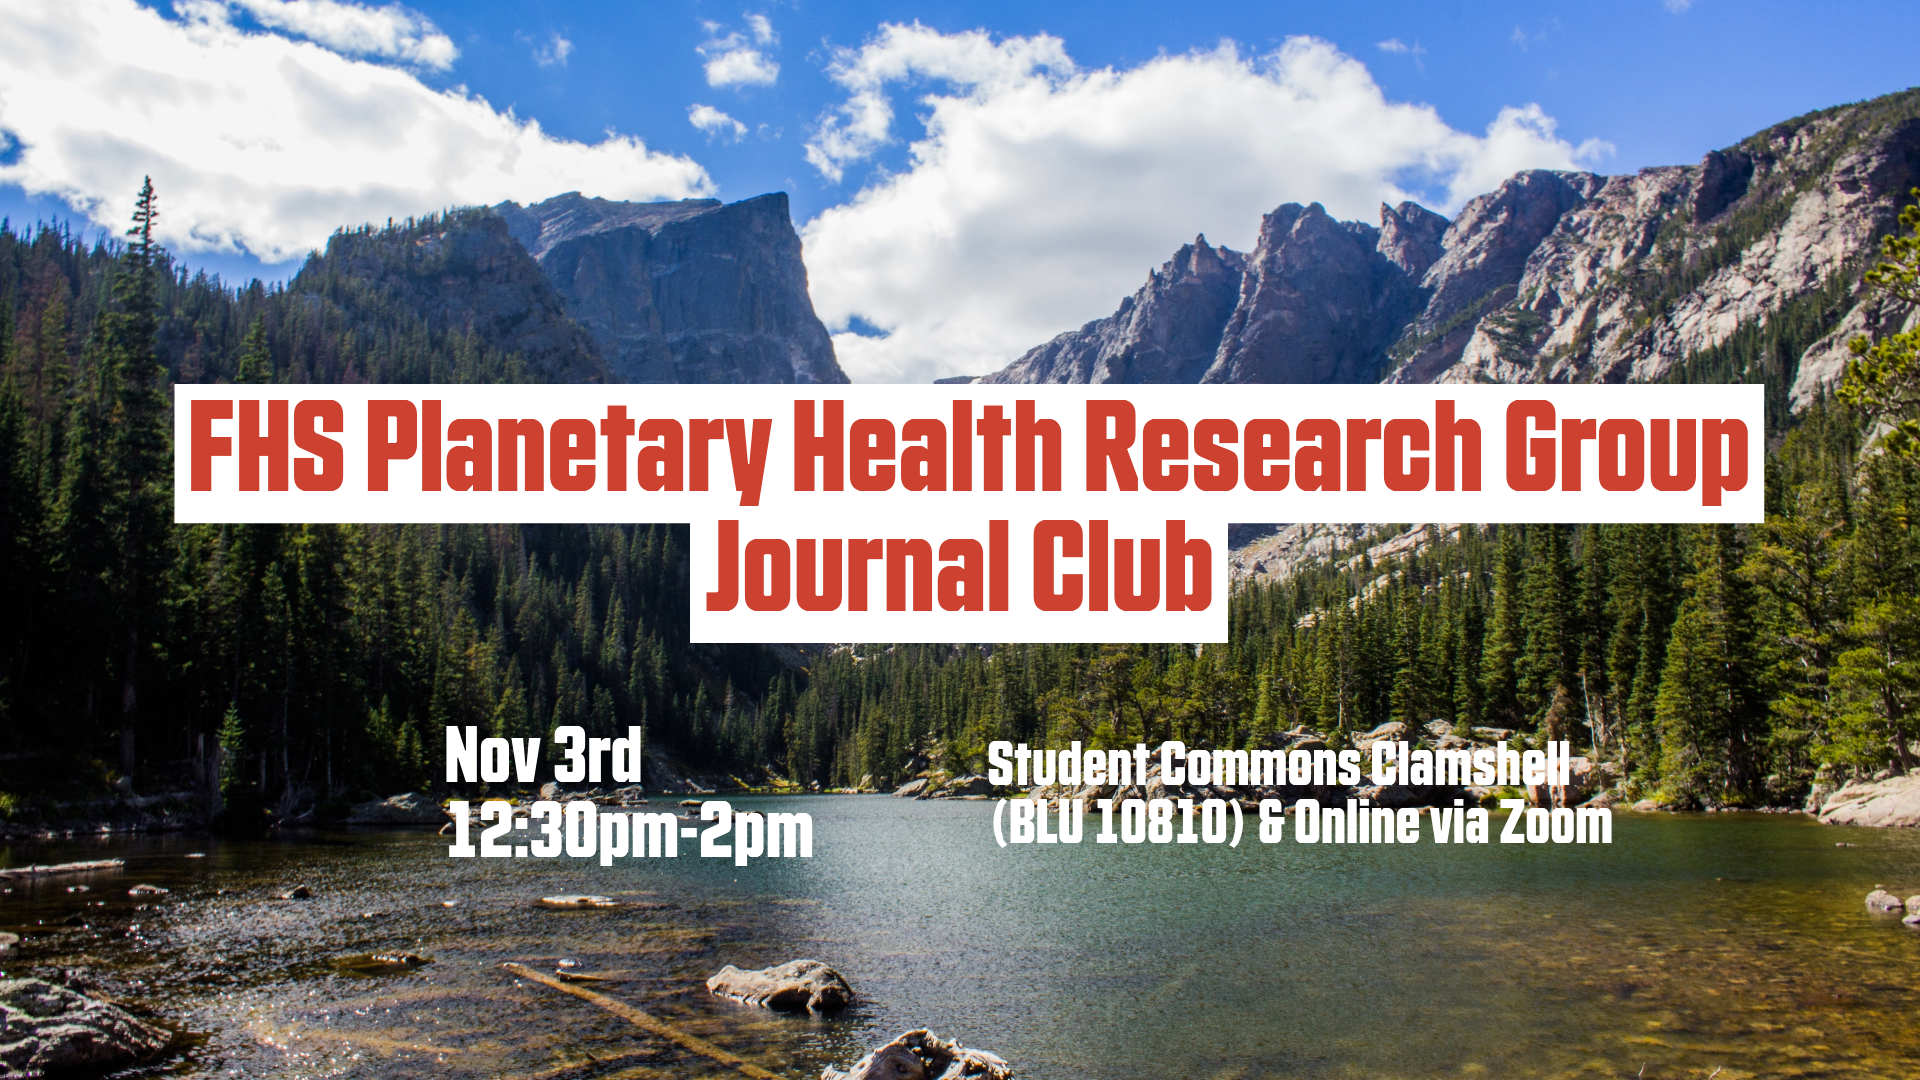 Nov 3: Planetary Health Research Group Journal Club